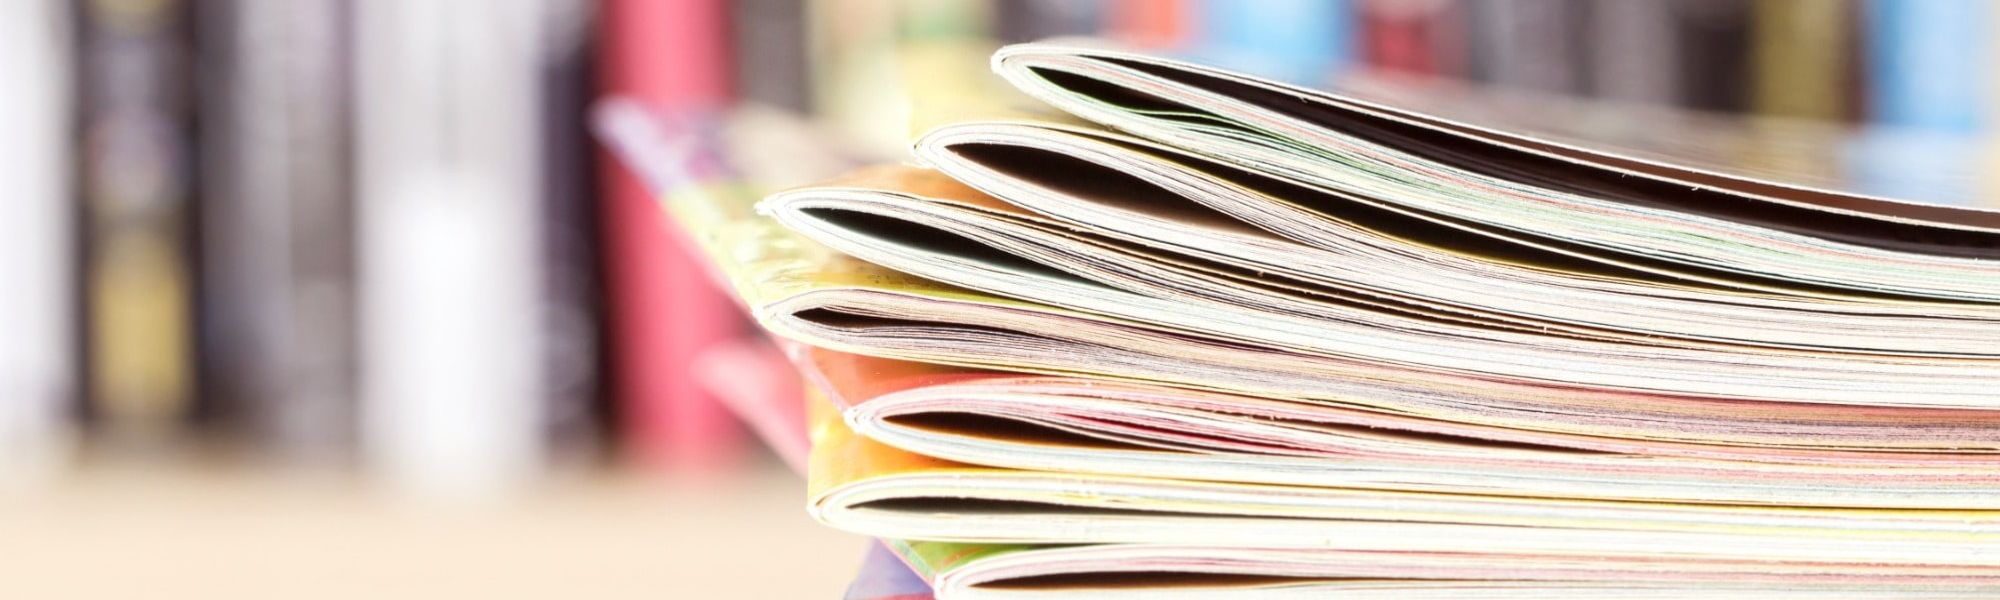 stack of publications, market insights, reports, salary guide, surveys